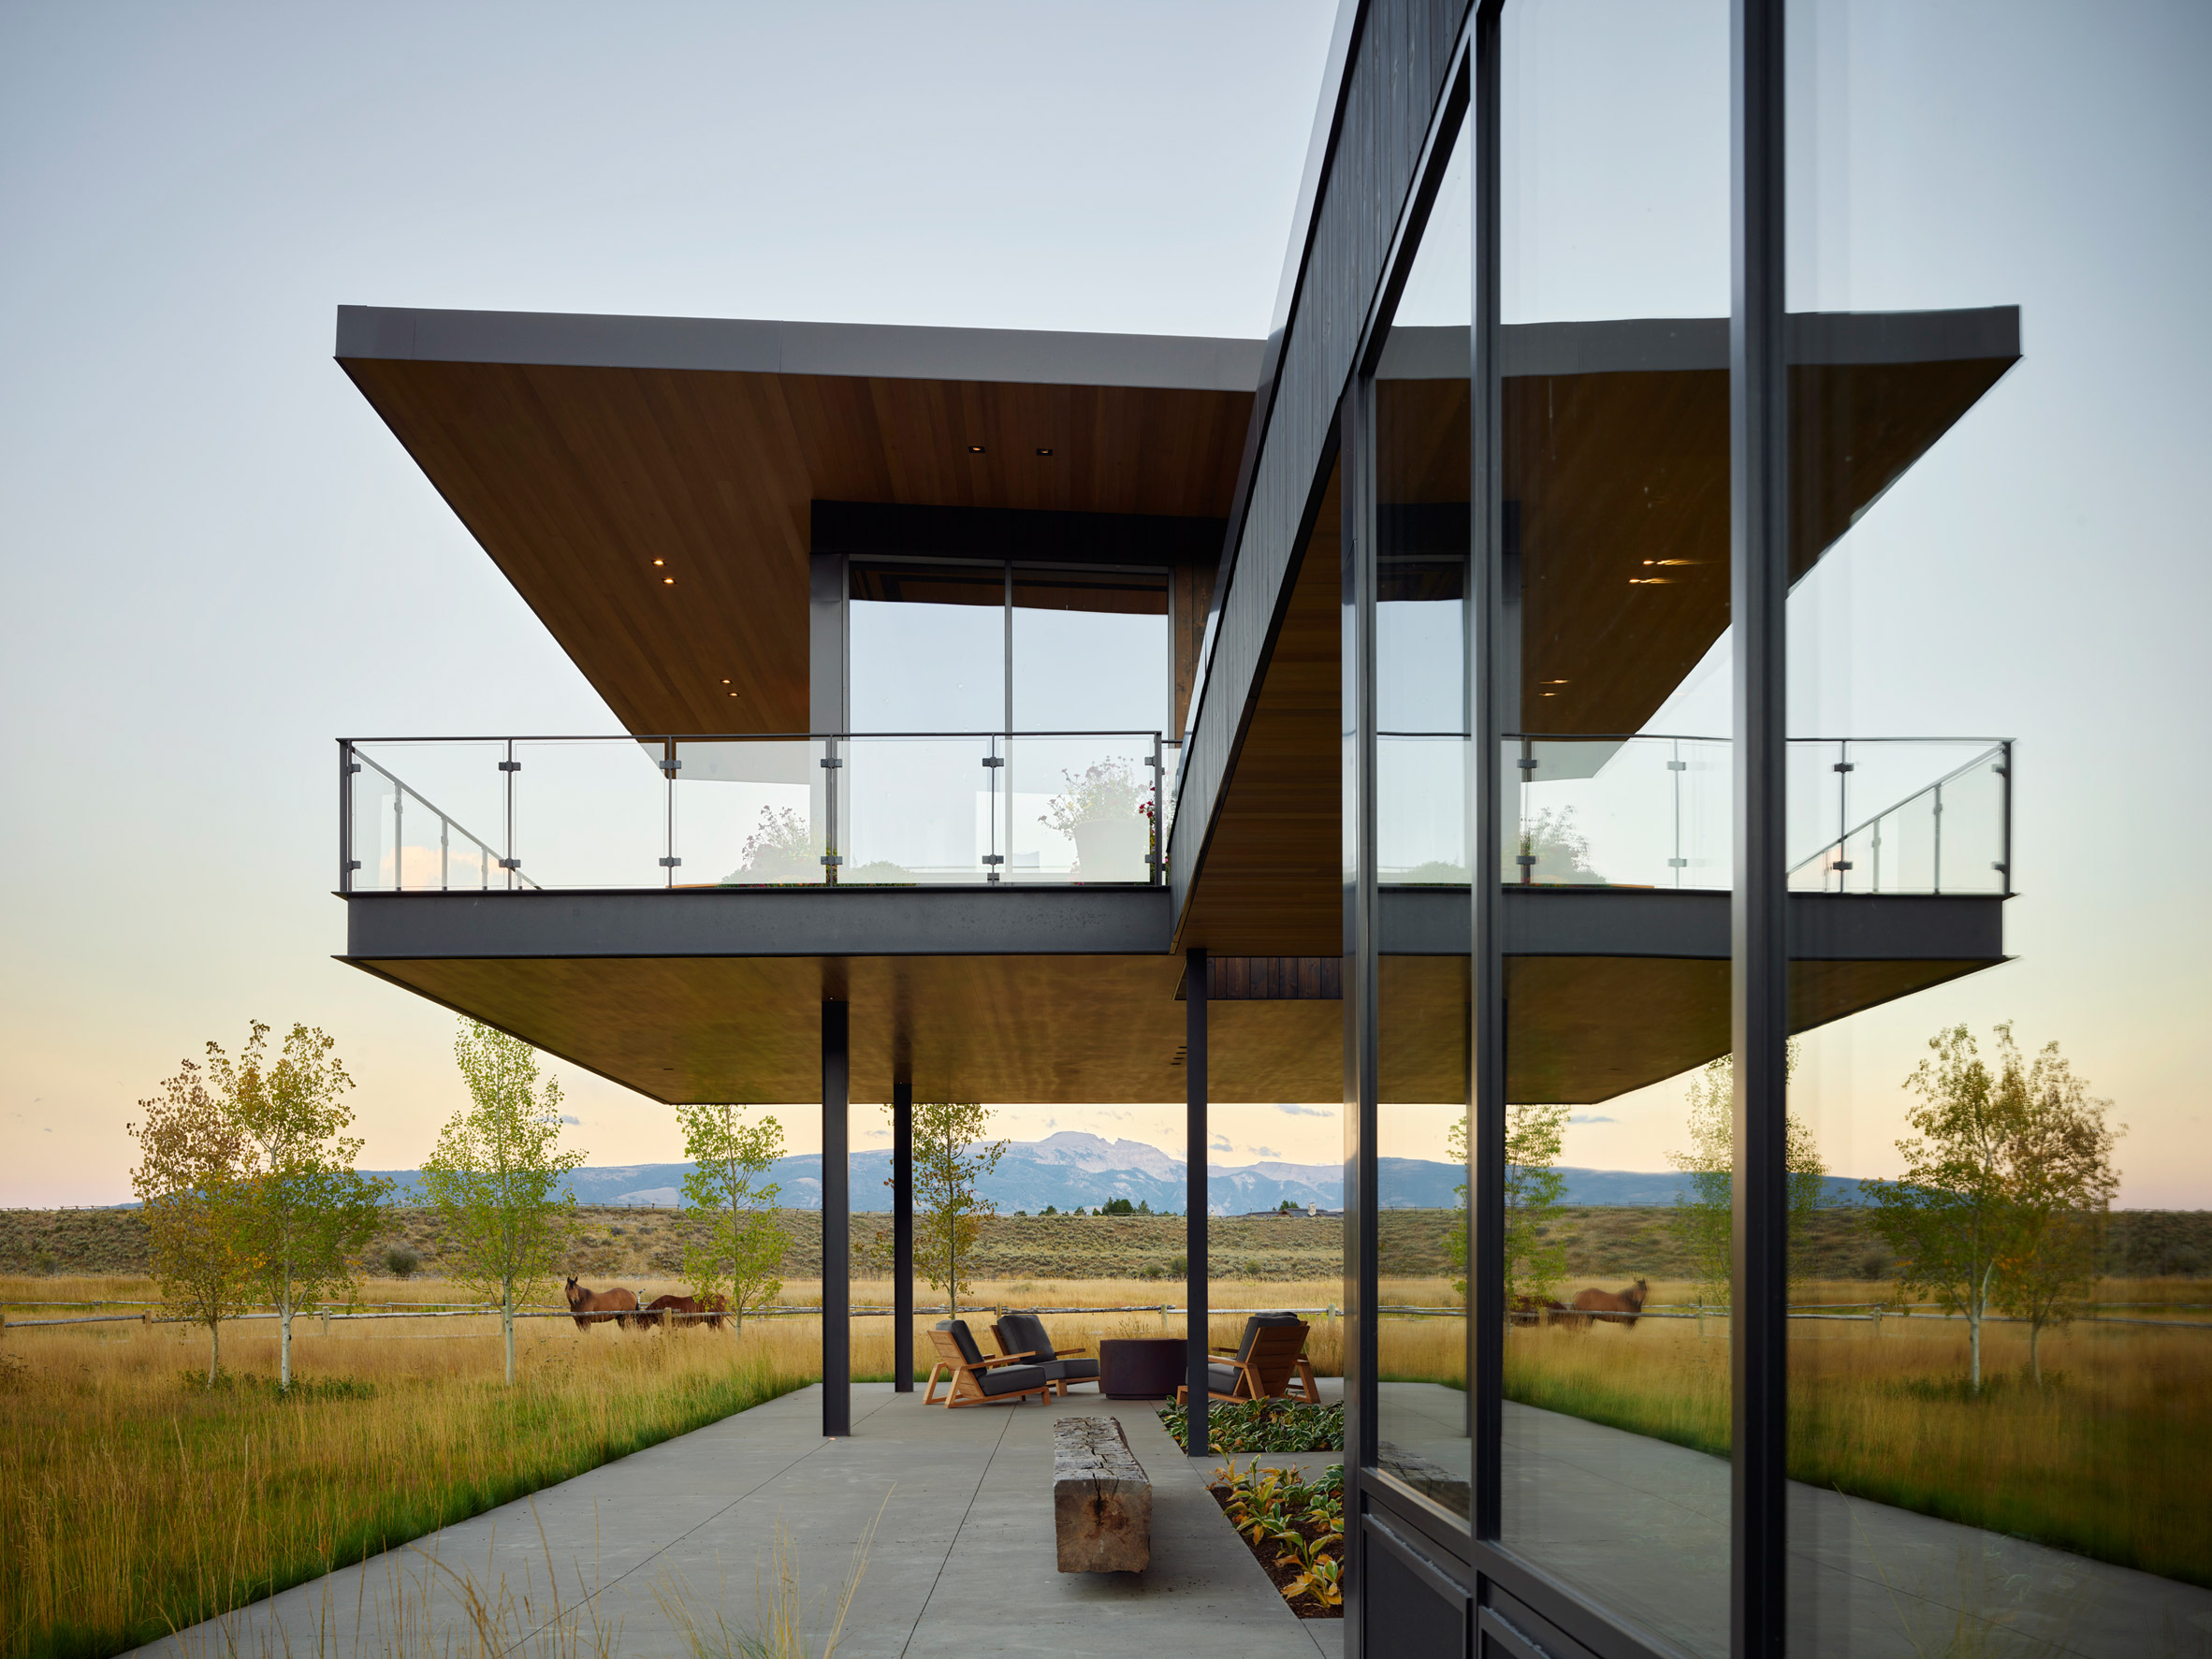 Rectilinear house at Black Fox Ranch in Jackson Hole, Wyoming